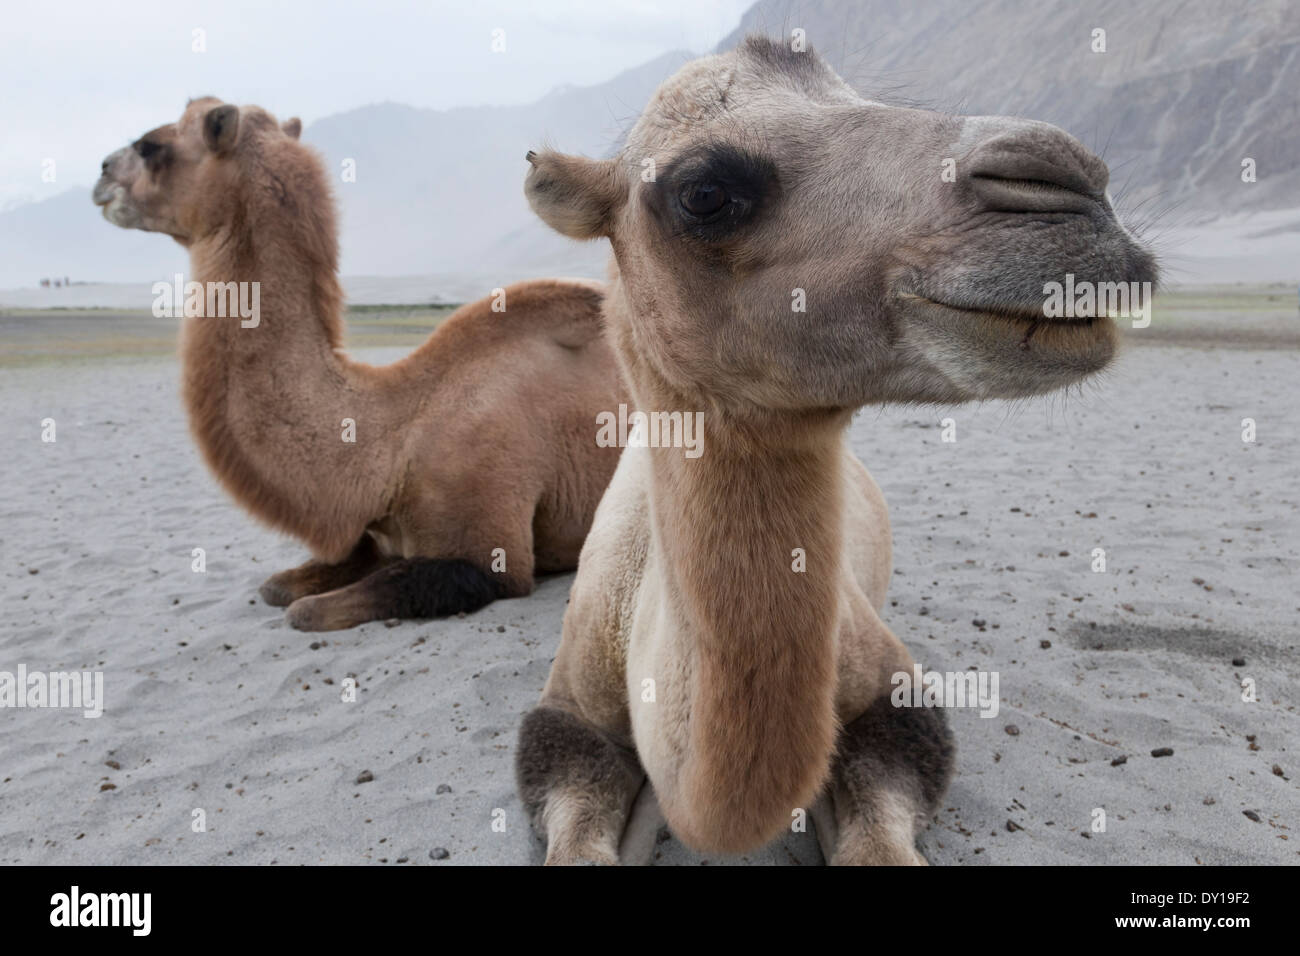 Ladakh, India. Bactrian camels used for tourist rides, Nubra Valley sand dunes, near Hunder Town Stock Photo